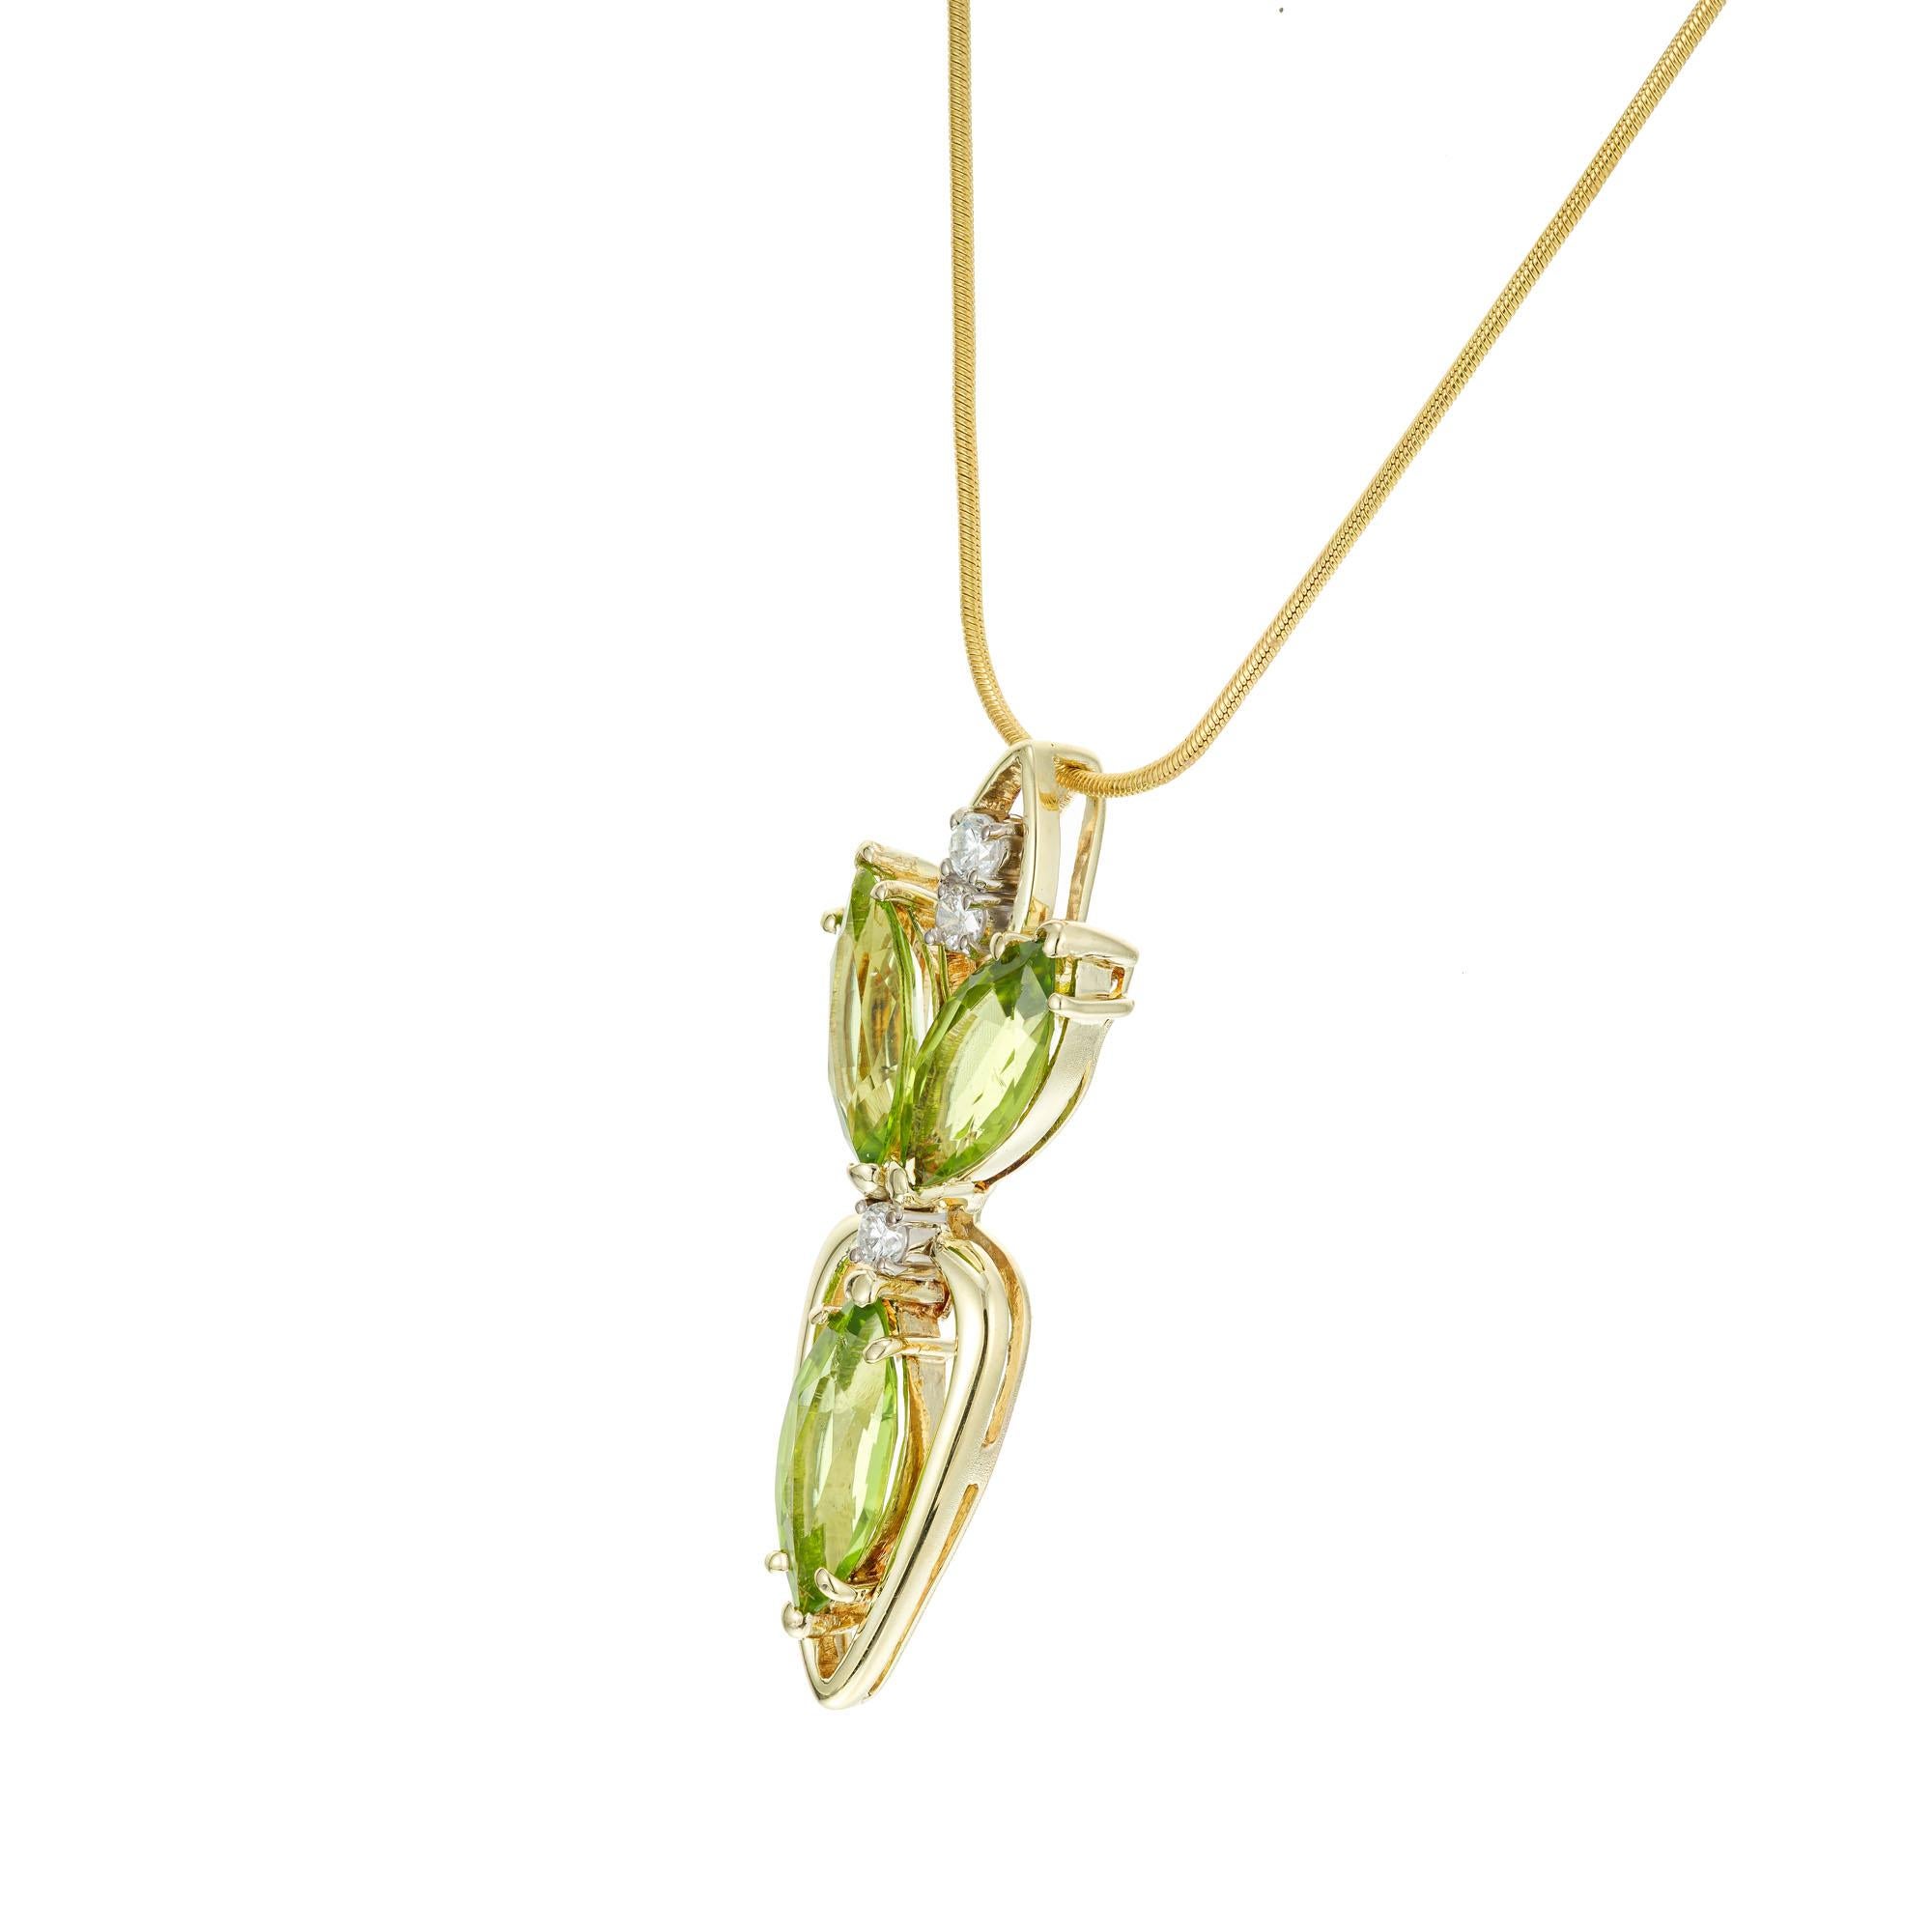 Peridot and diamond pendant necklace. 3 marquise shaped peridots accented with 3 round diamonds in 14k yellow gold. 18 inch snake chain with a lobster catch.

3 marquise yellowish green peridot, VS-SI approx. 2.50cts
3 round brilliant cut diamonds,